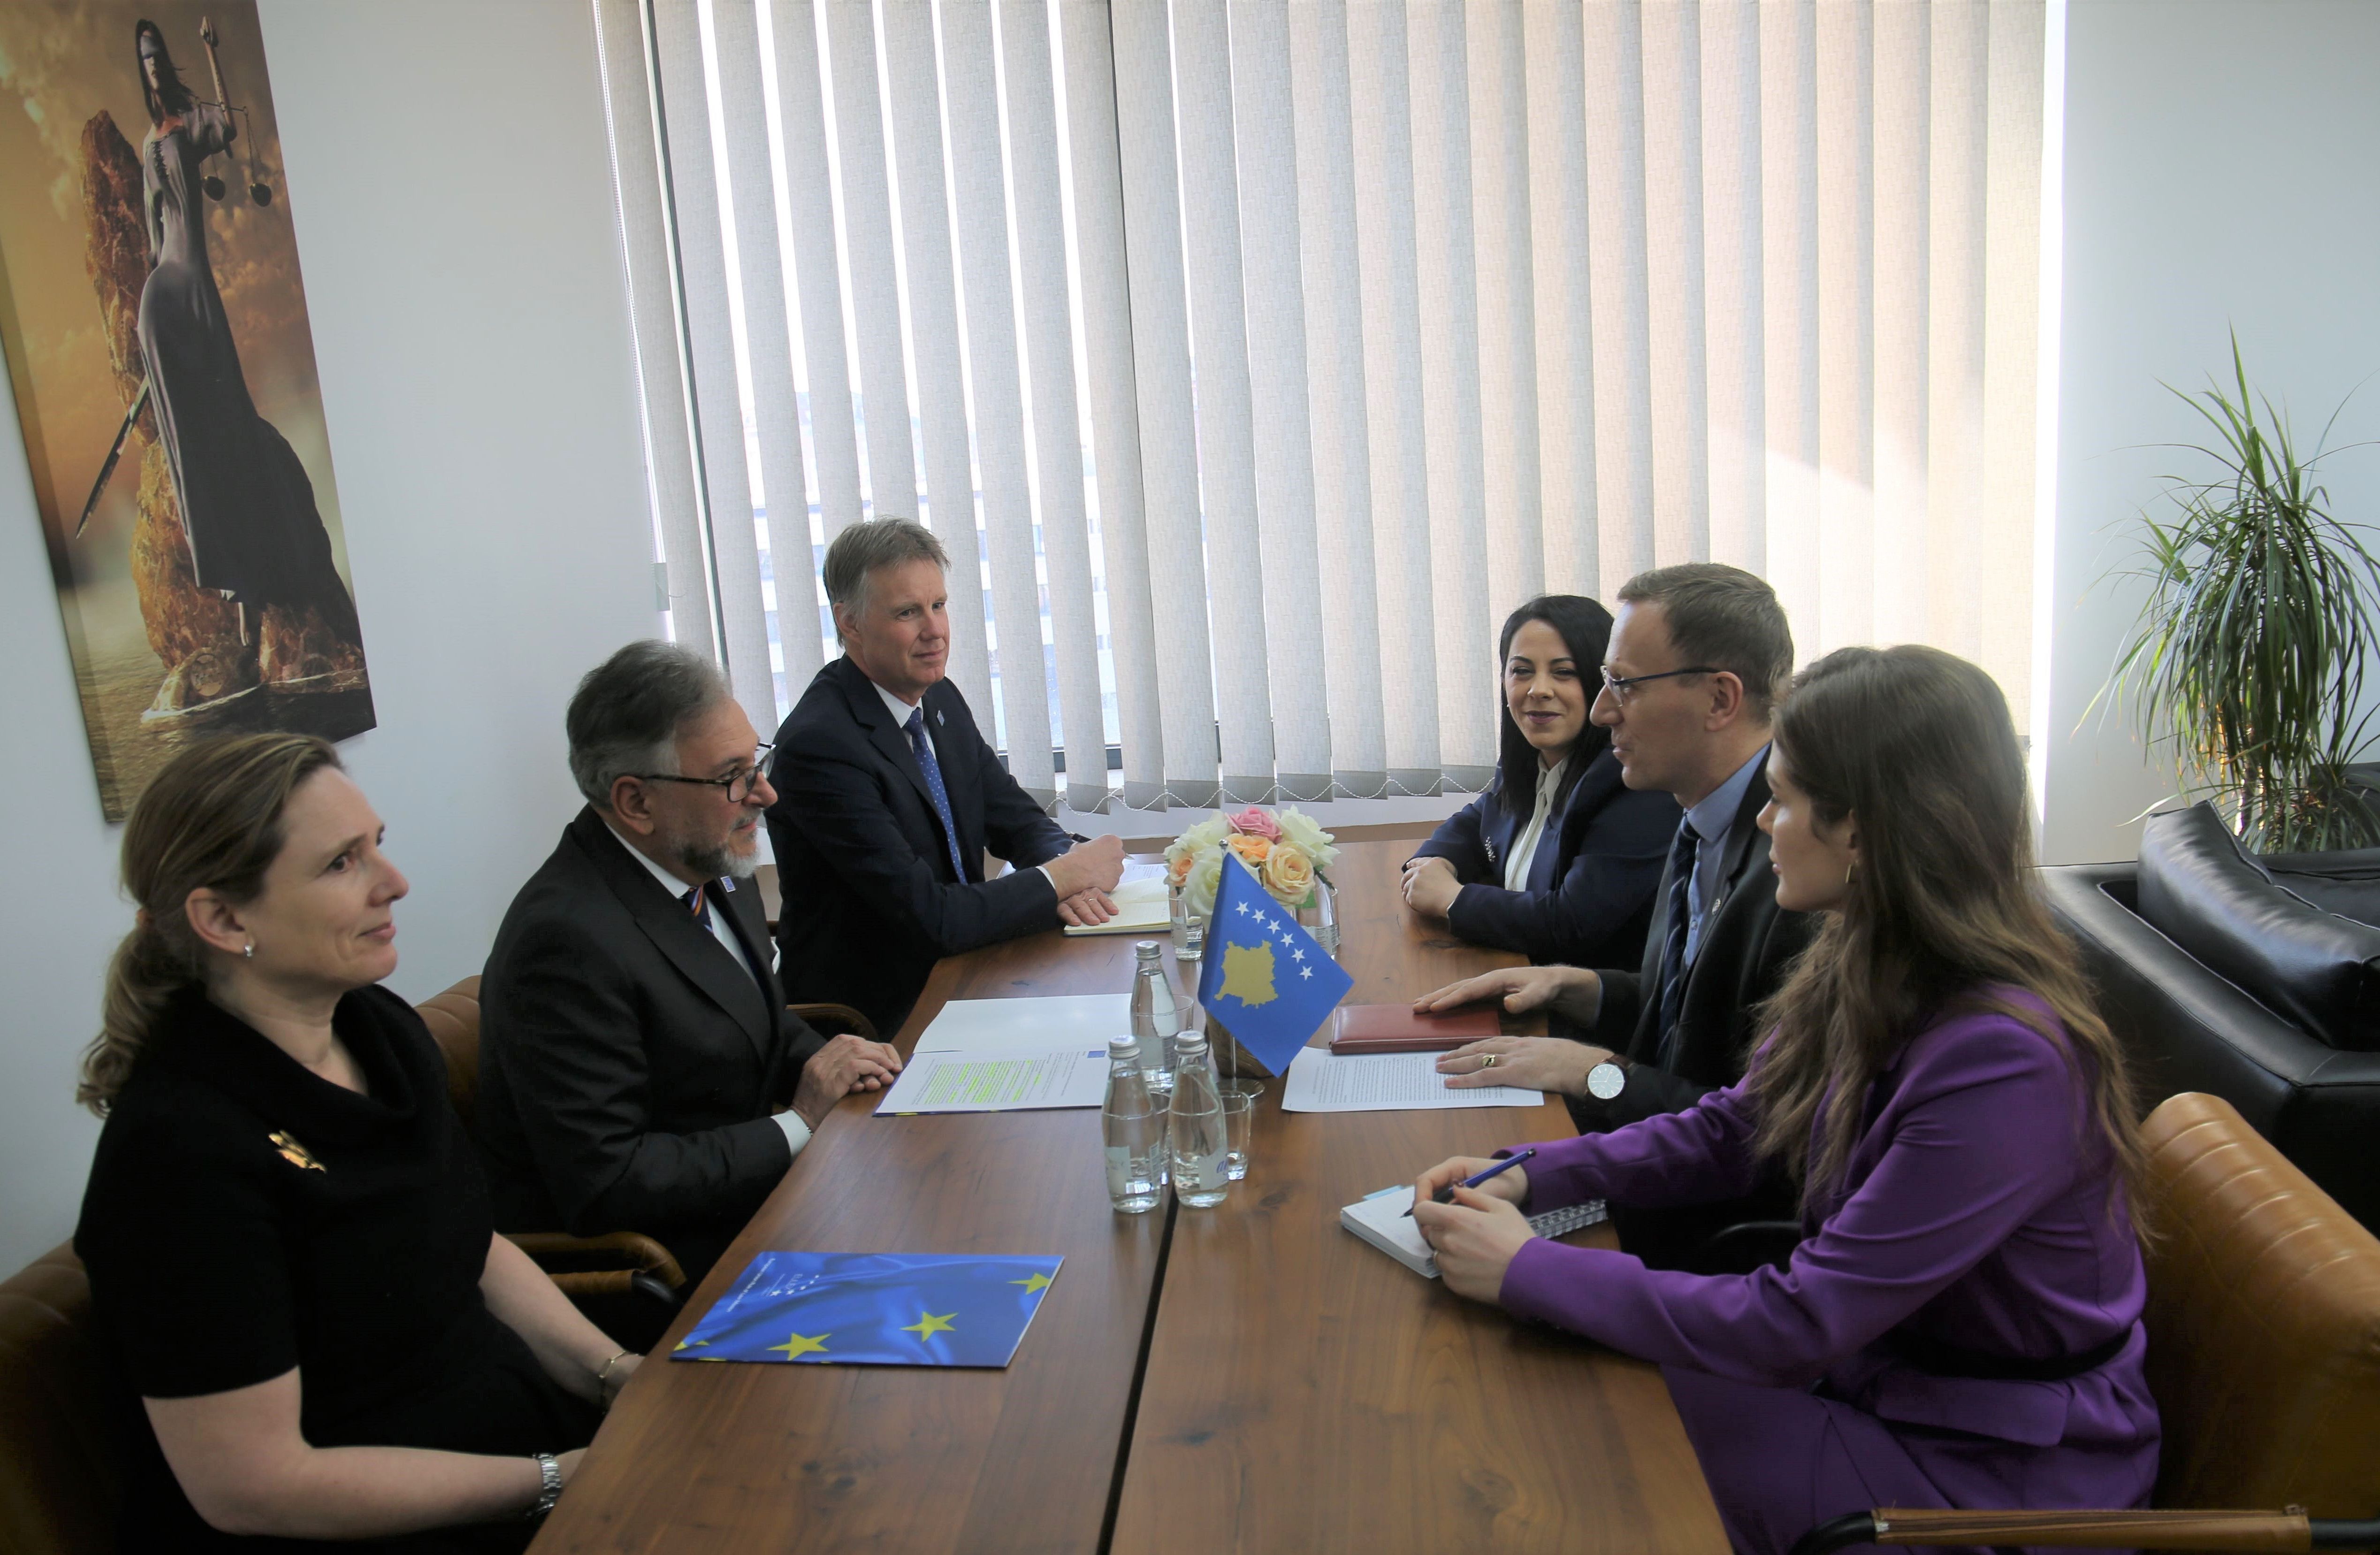 The chairman of the Prosecution Council, Ardian Hajdaraj, hosted the head of EULEX, Giovanni Barbano and deputy head Emily Rakhorst in a meeting